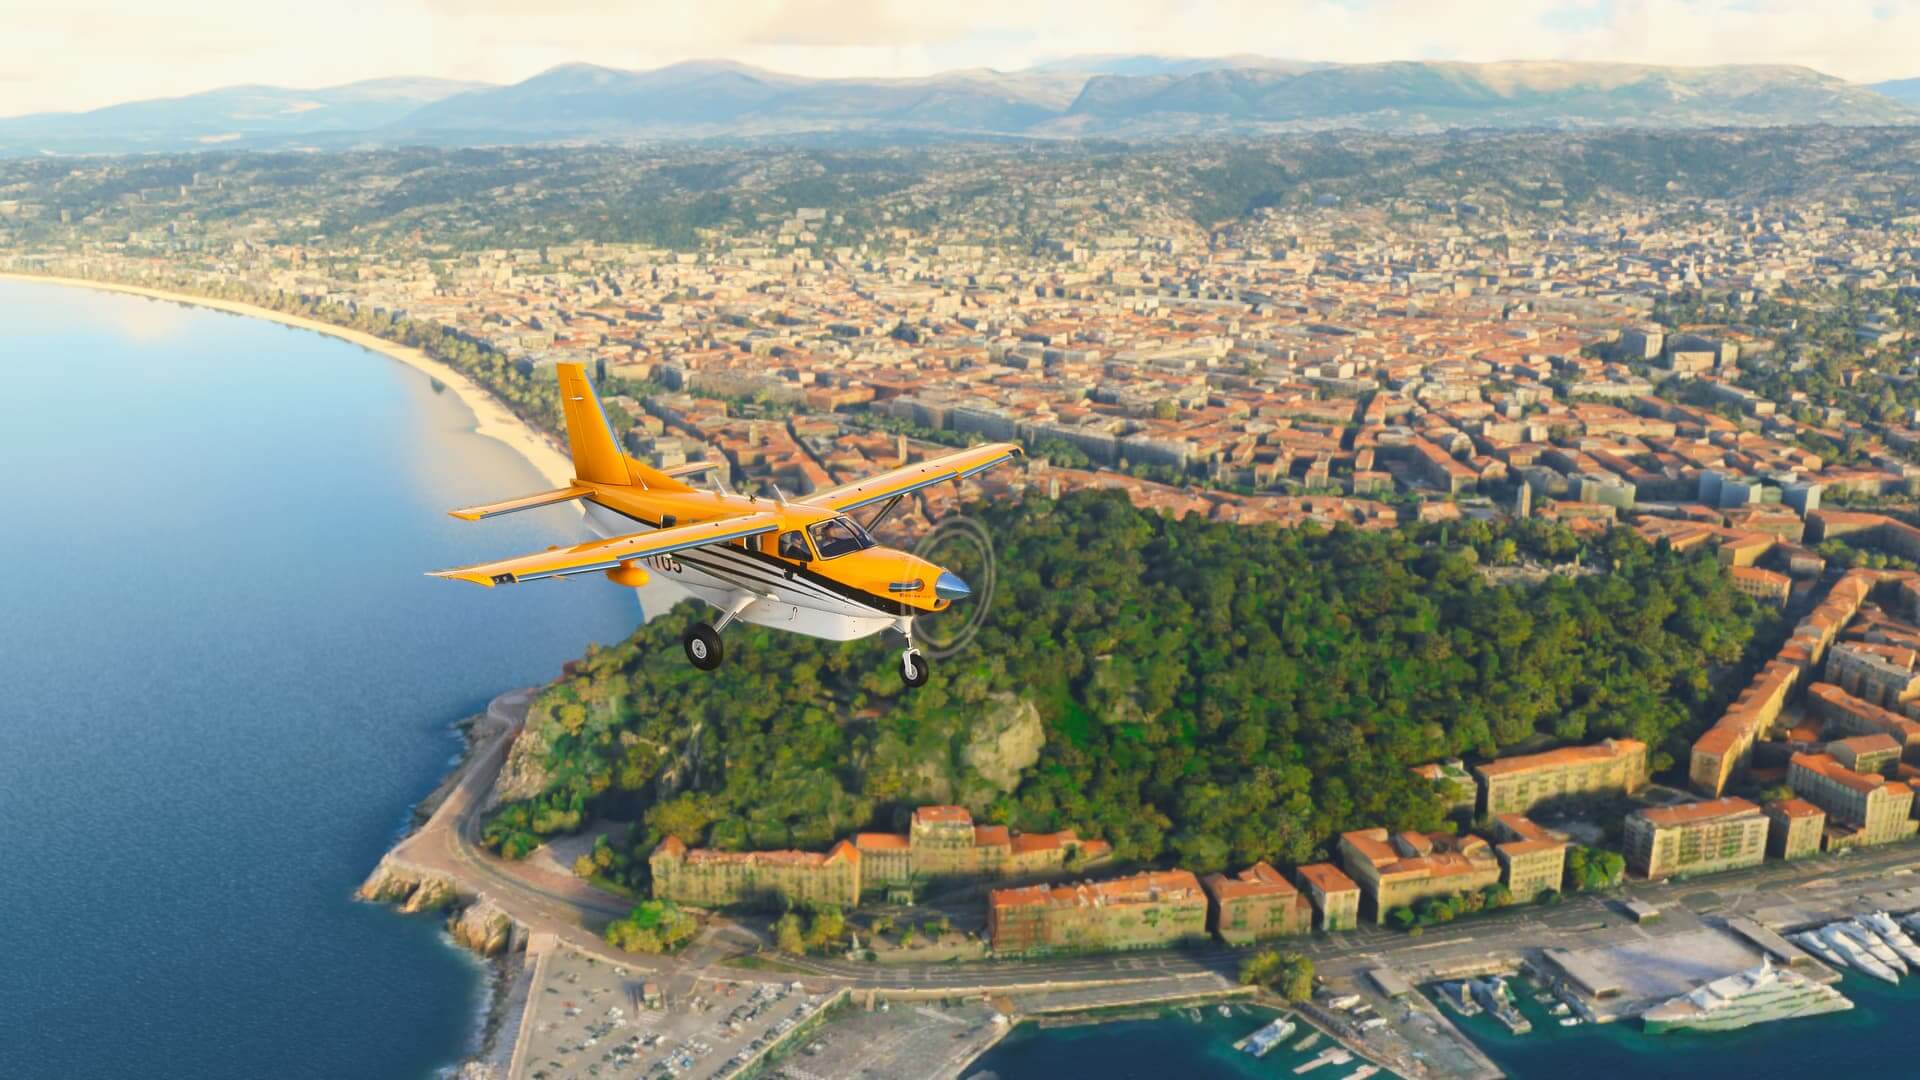 A yellow and white high wing propeller aircraft flies along the coast of Monaco